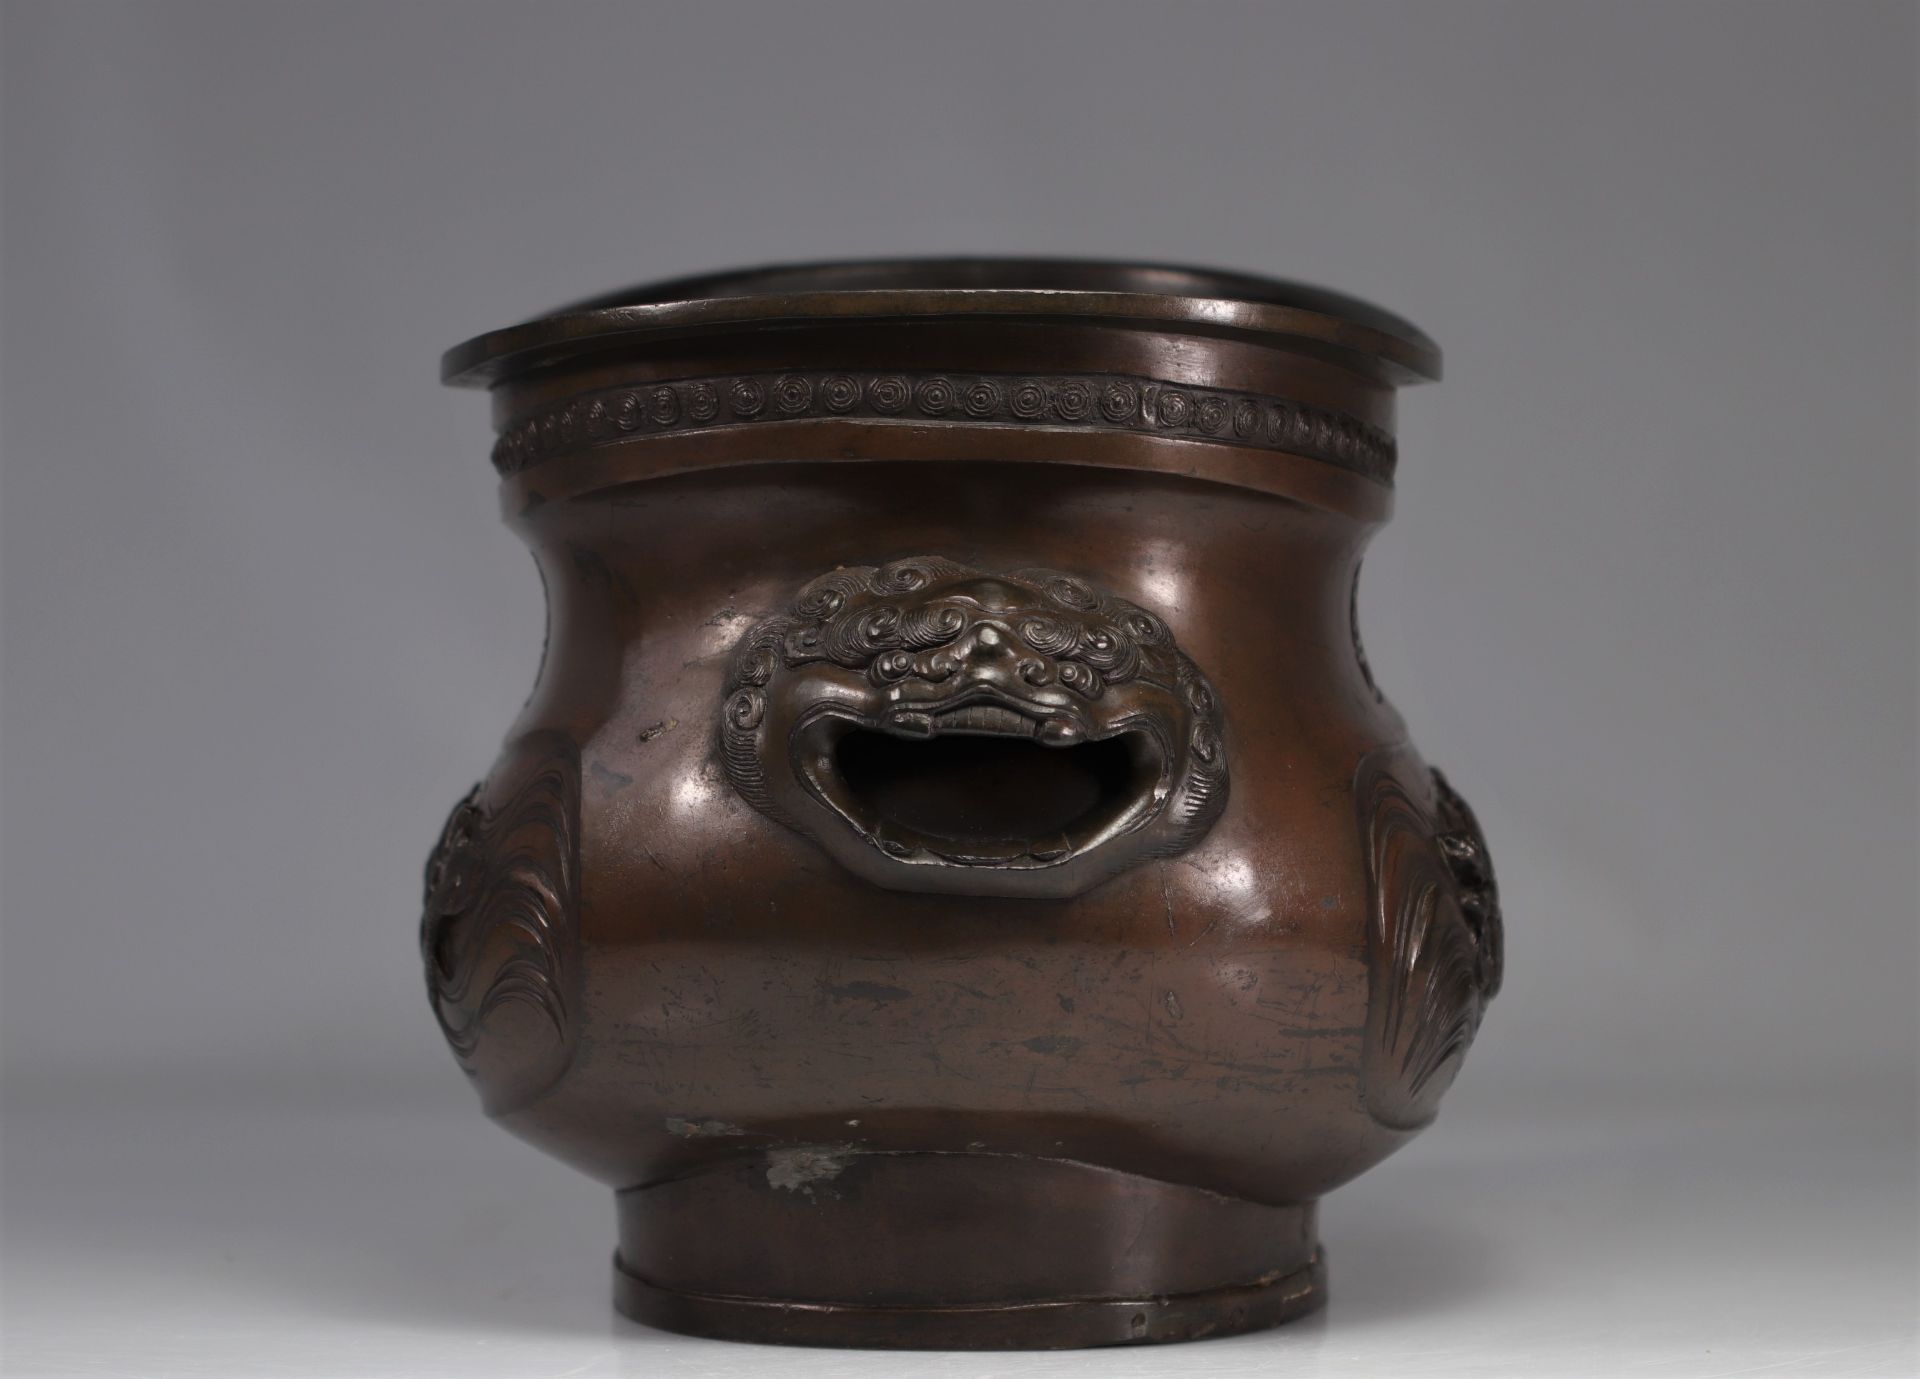 Japanese bronze planter decorated with dragons from 19th century - Image 4 of 5